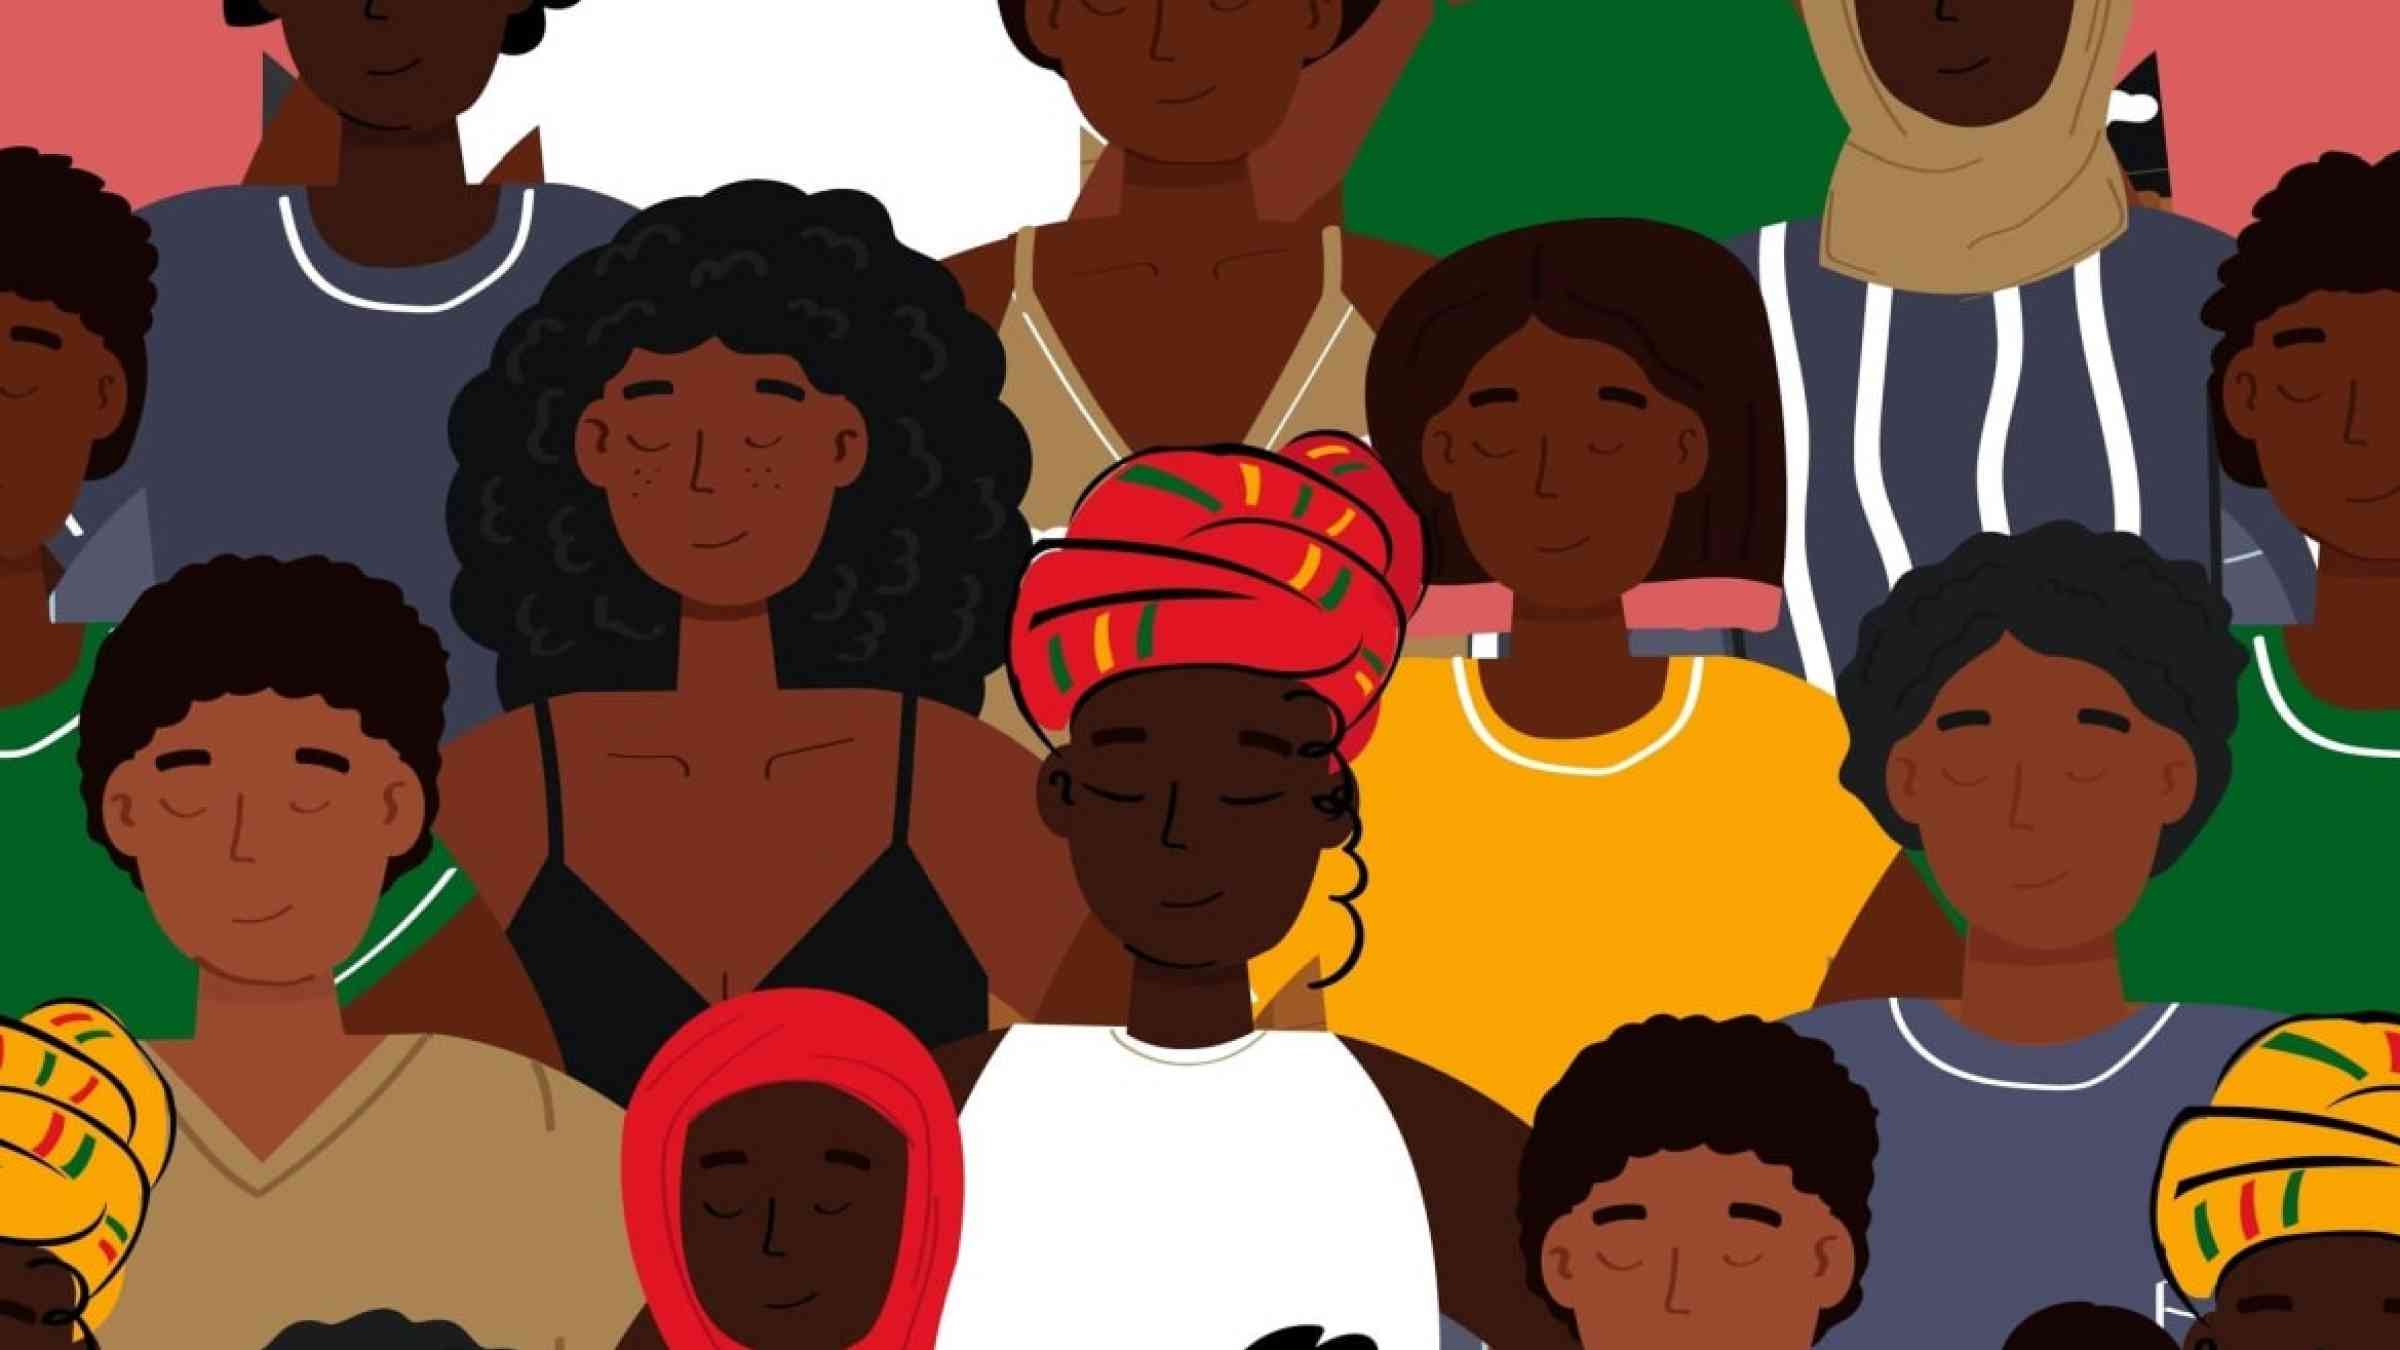 Illustration with Black men and women